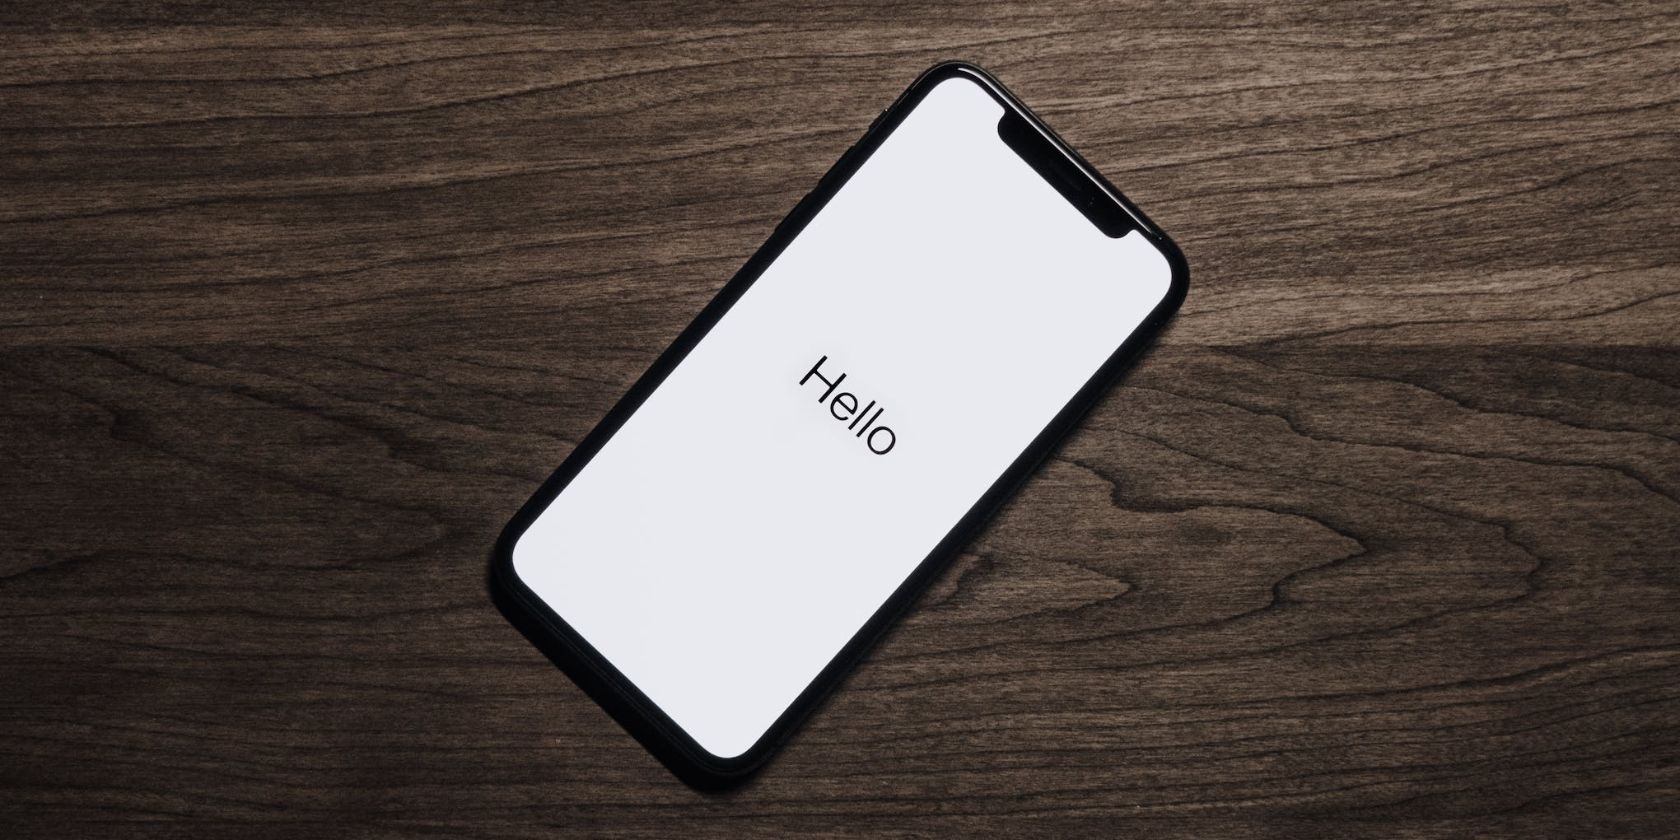 iphone on wooden surface showing white hello screen 